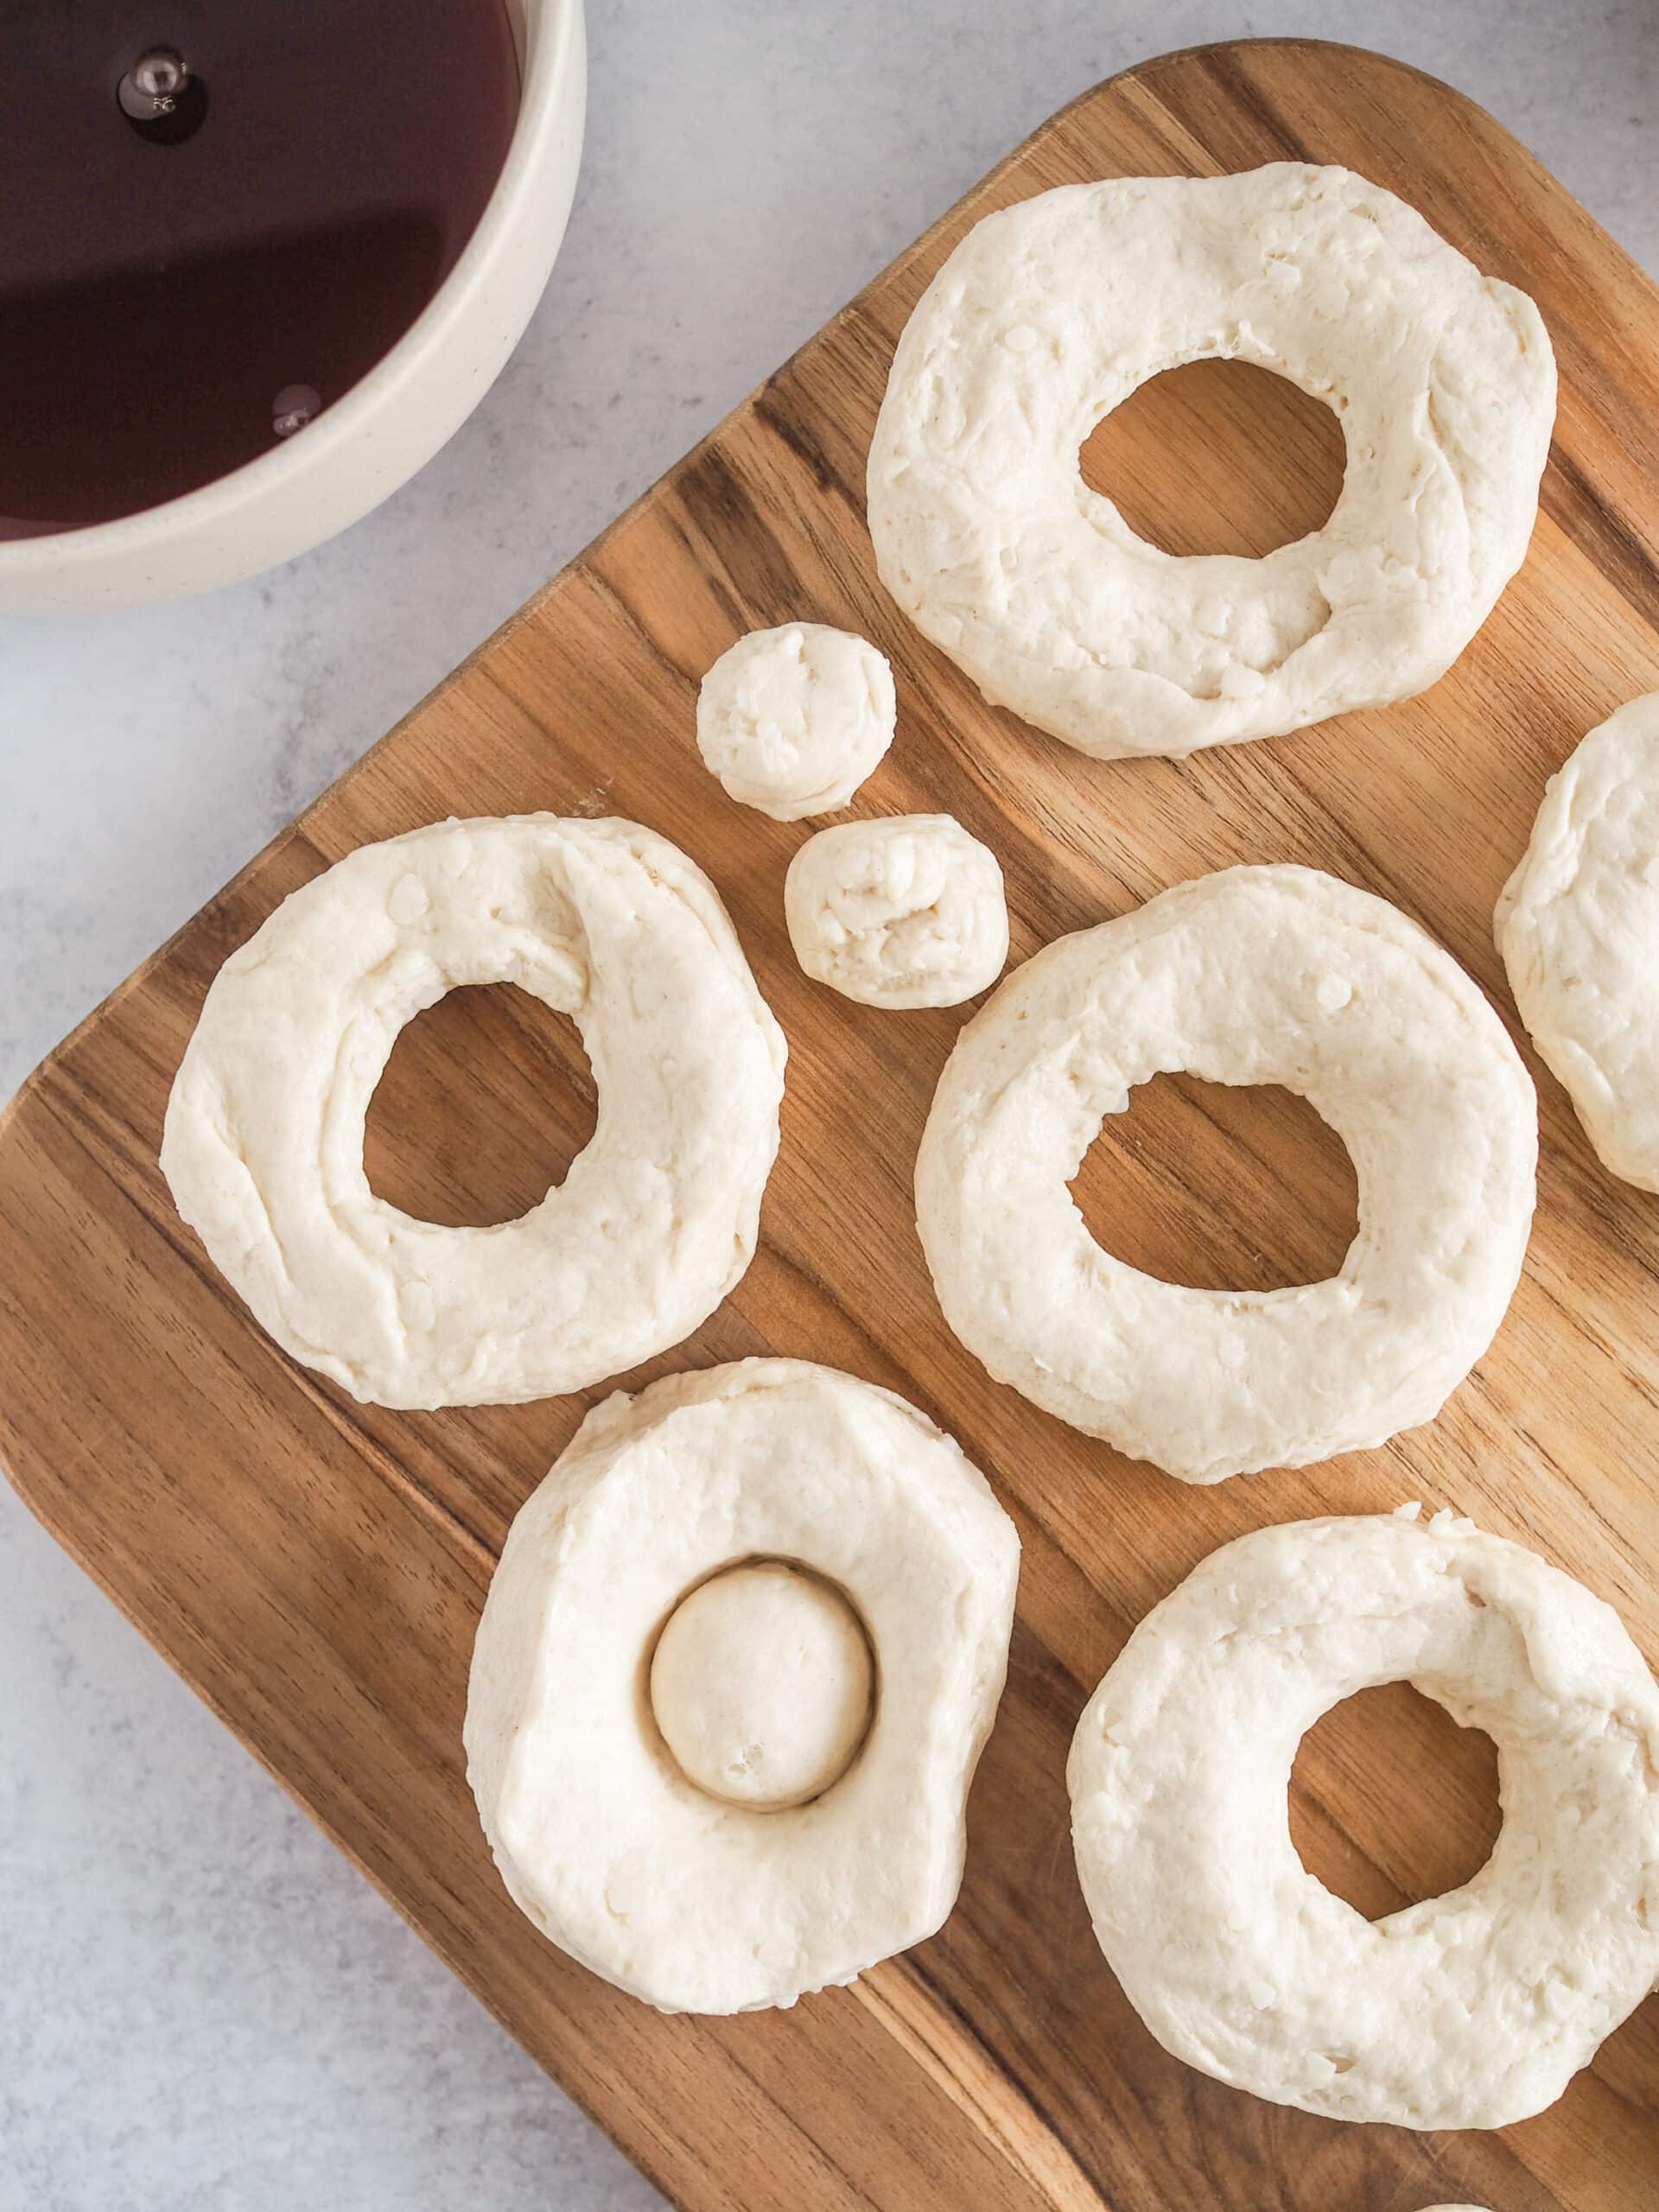 https://thetravelbite.com/wp-content/uploads/2022/09/Apple-Cider-Air-Fryer-Donuts-TheTravelBite.com-11-scaled.jpg